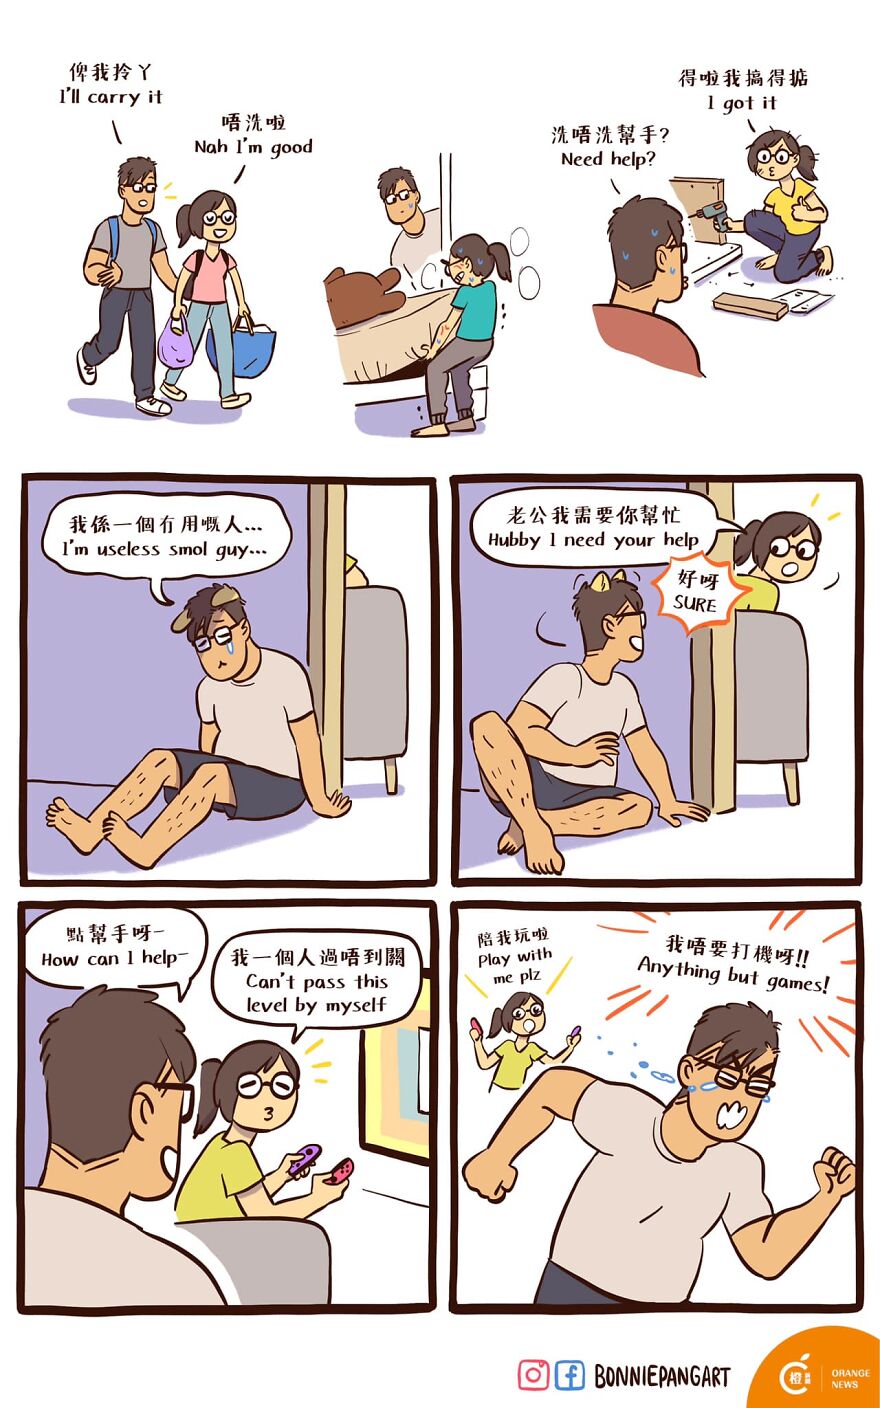 Artist Draws Her Everyday Life With An It Guy In New Amusing Comics